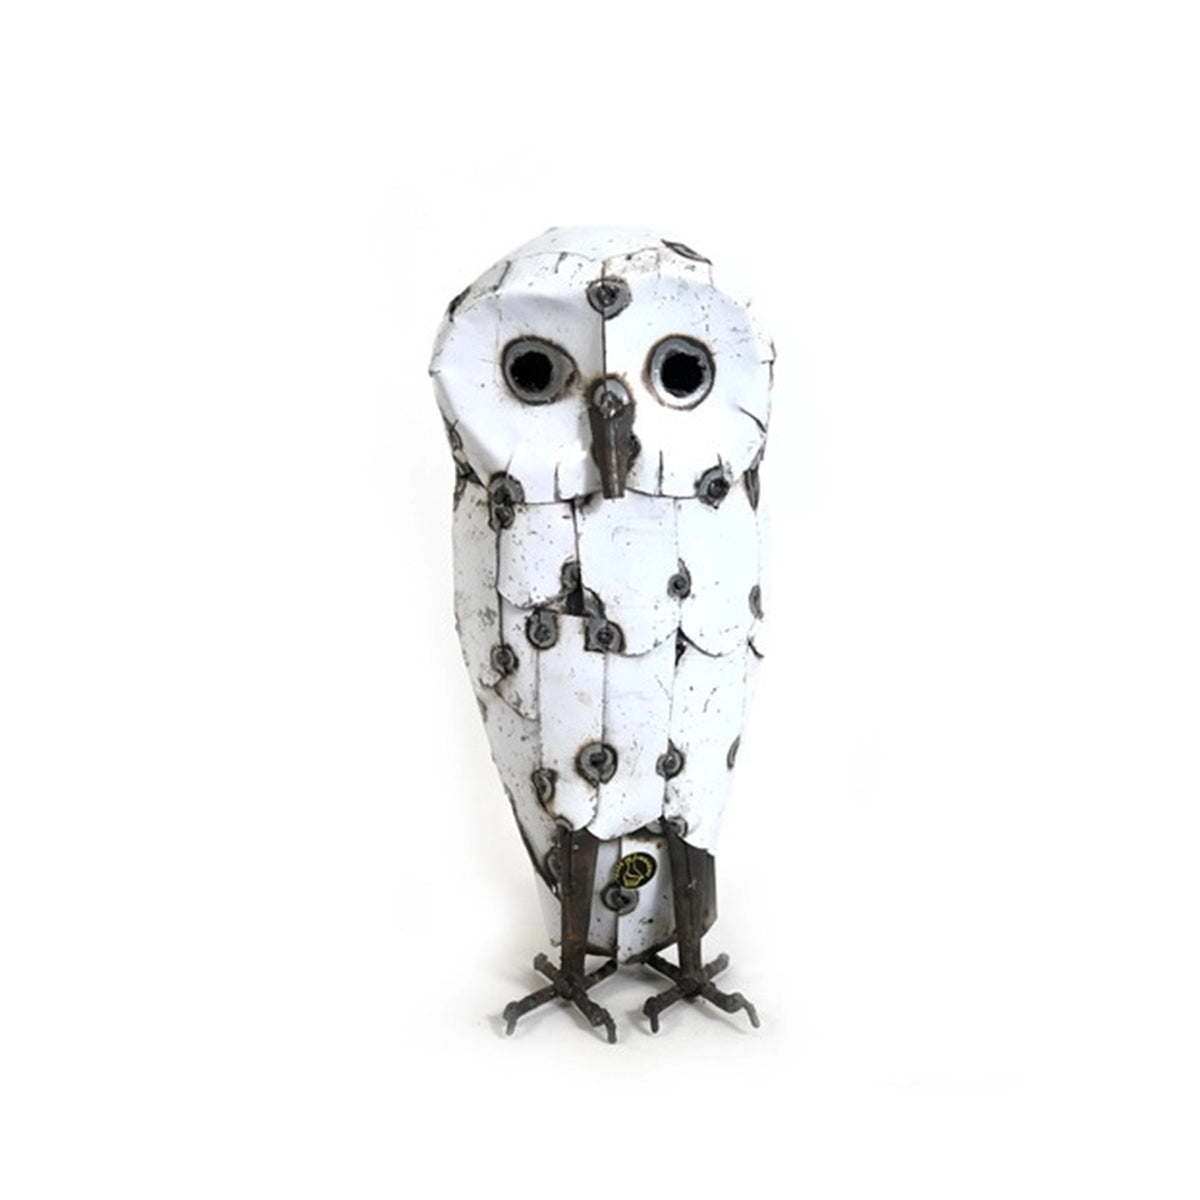 Snowy Owl Recycled Metal Sculpture